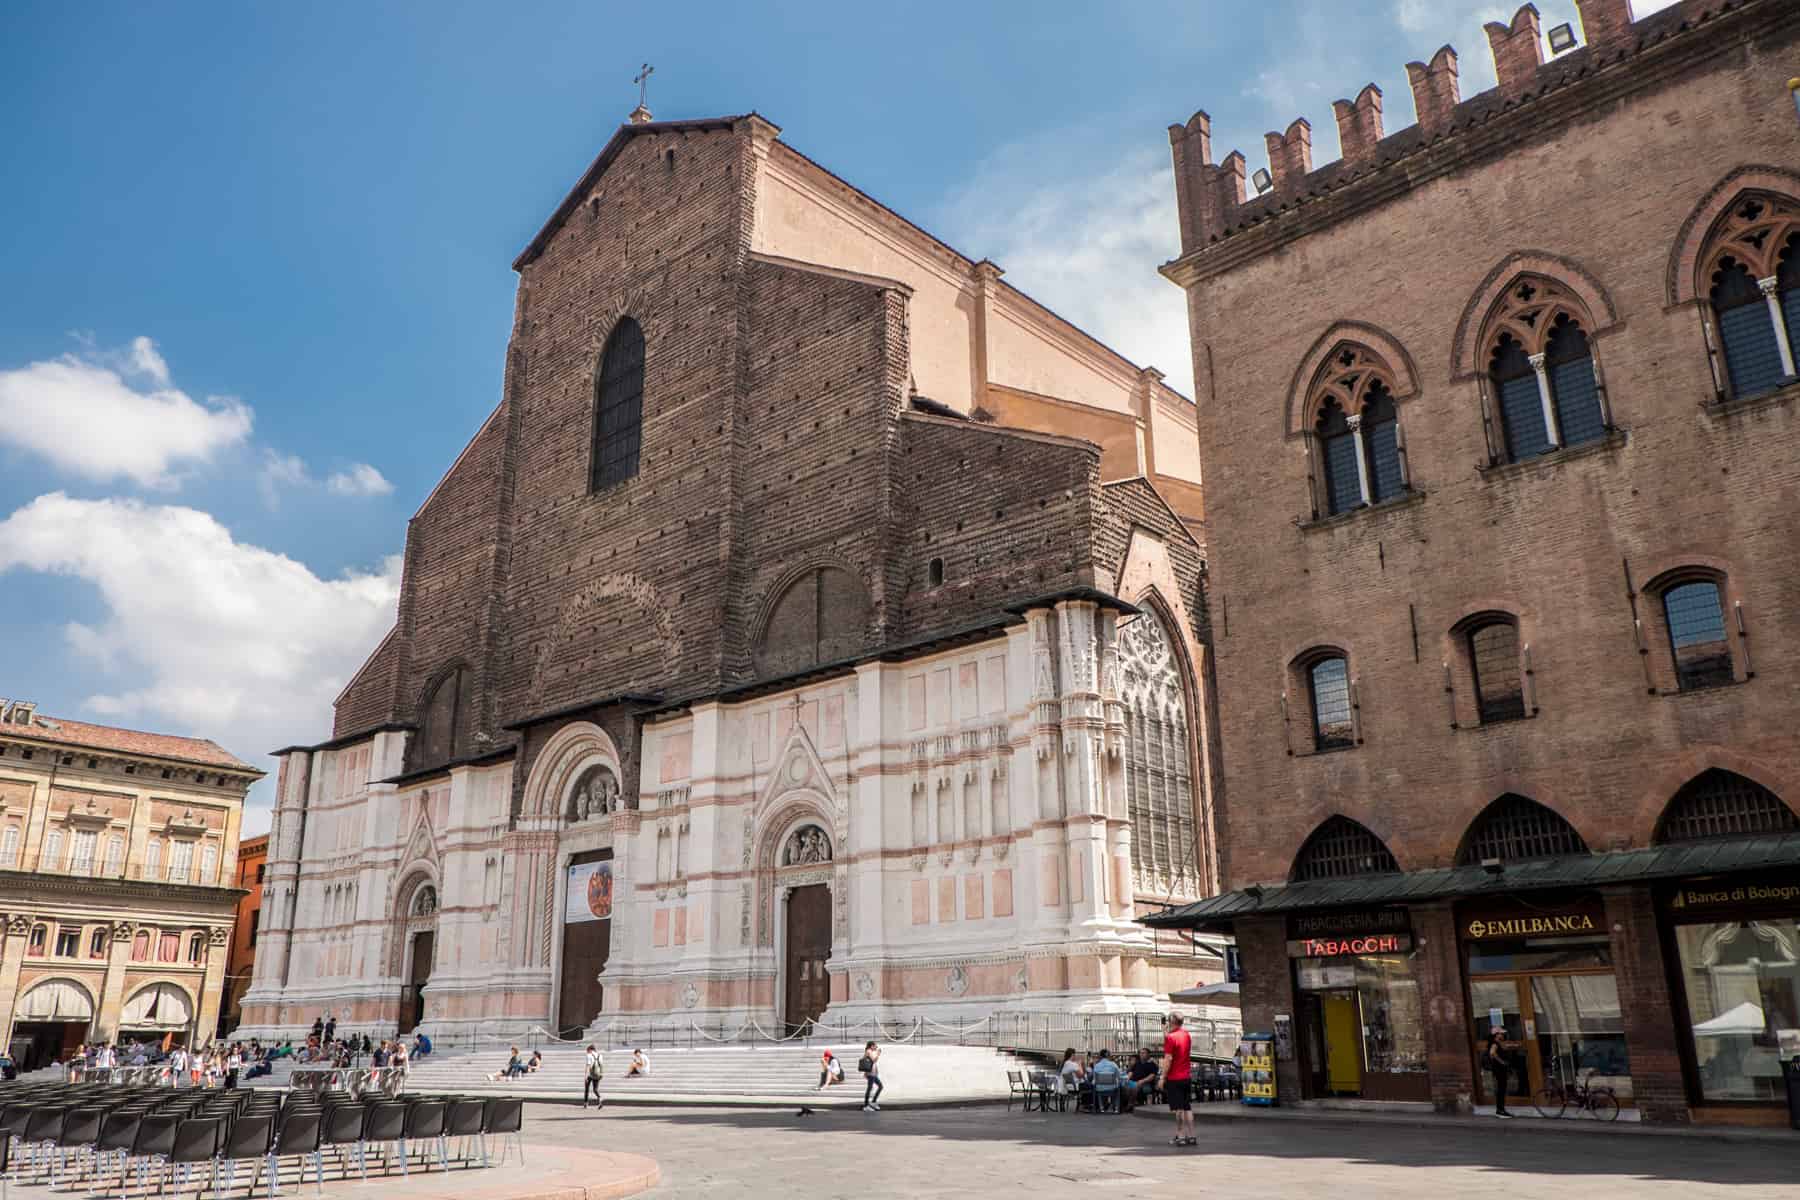 A church in Bologna city with a white and salmon pink stone bottom half and a brown stone top half. To the right is a brown, medieval building with a castle-like turret roof. 